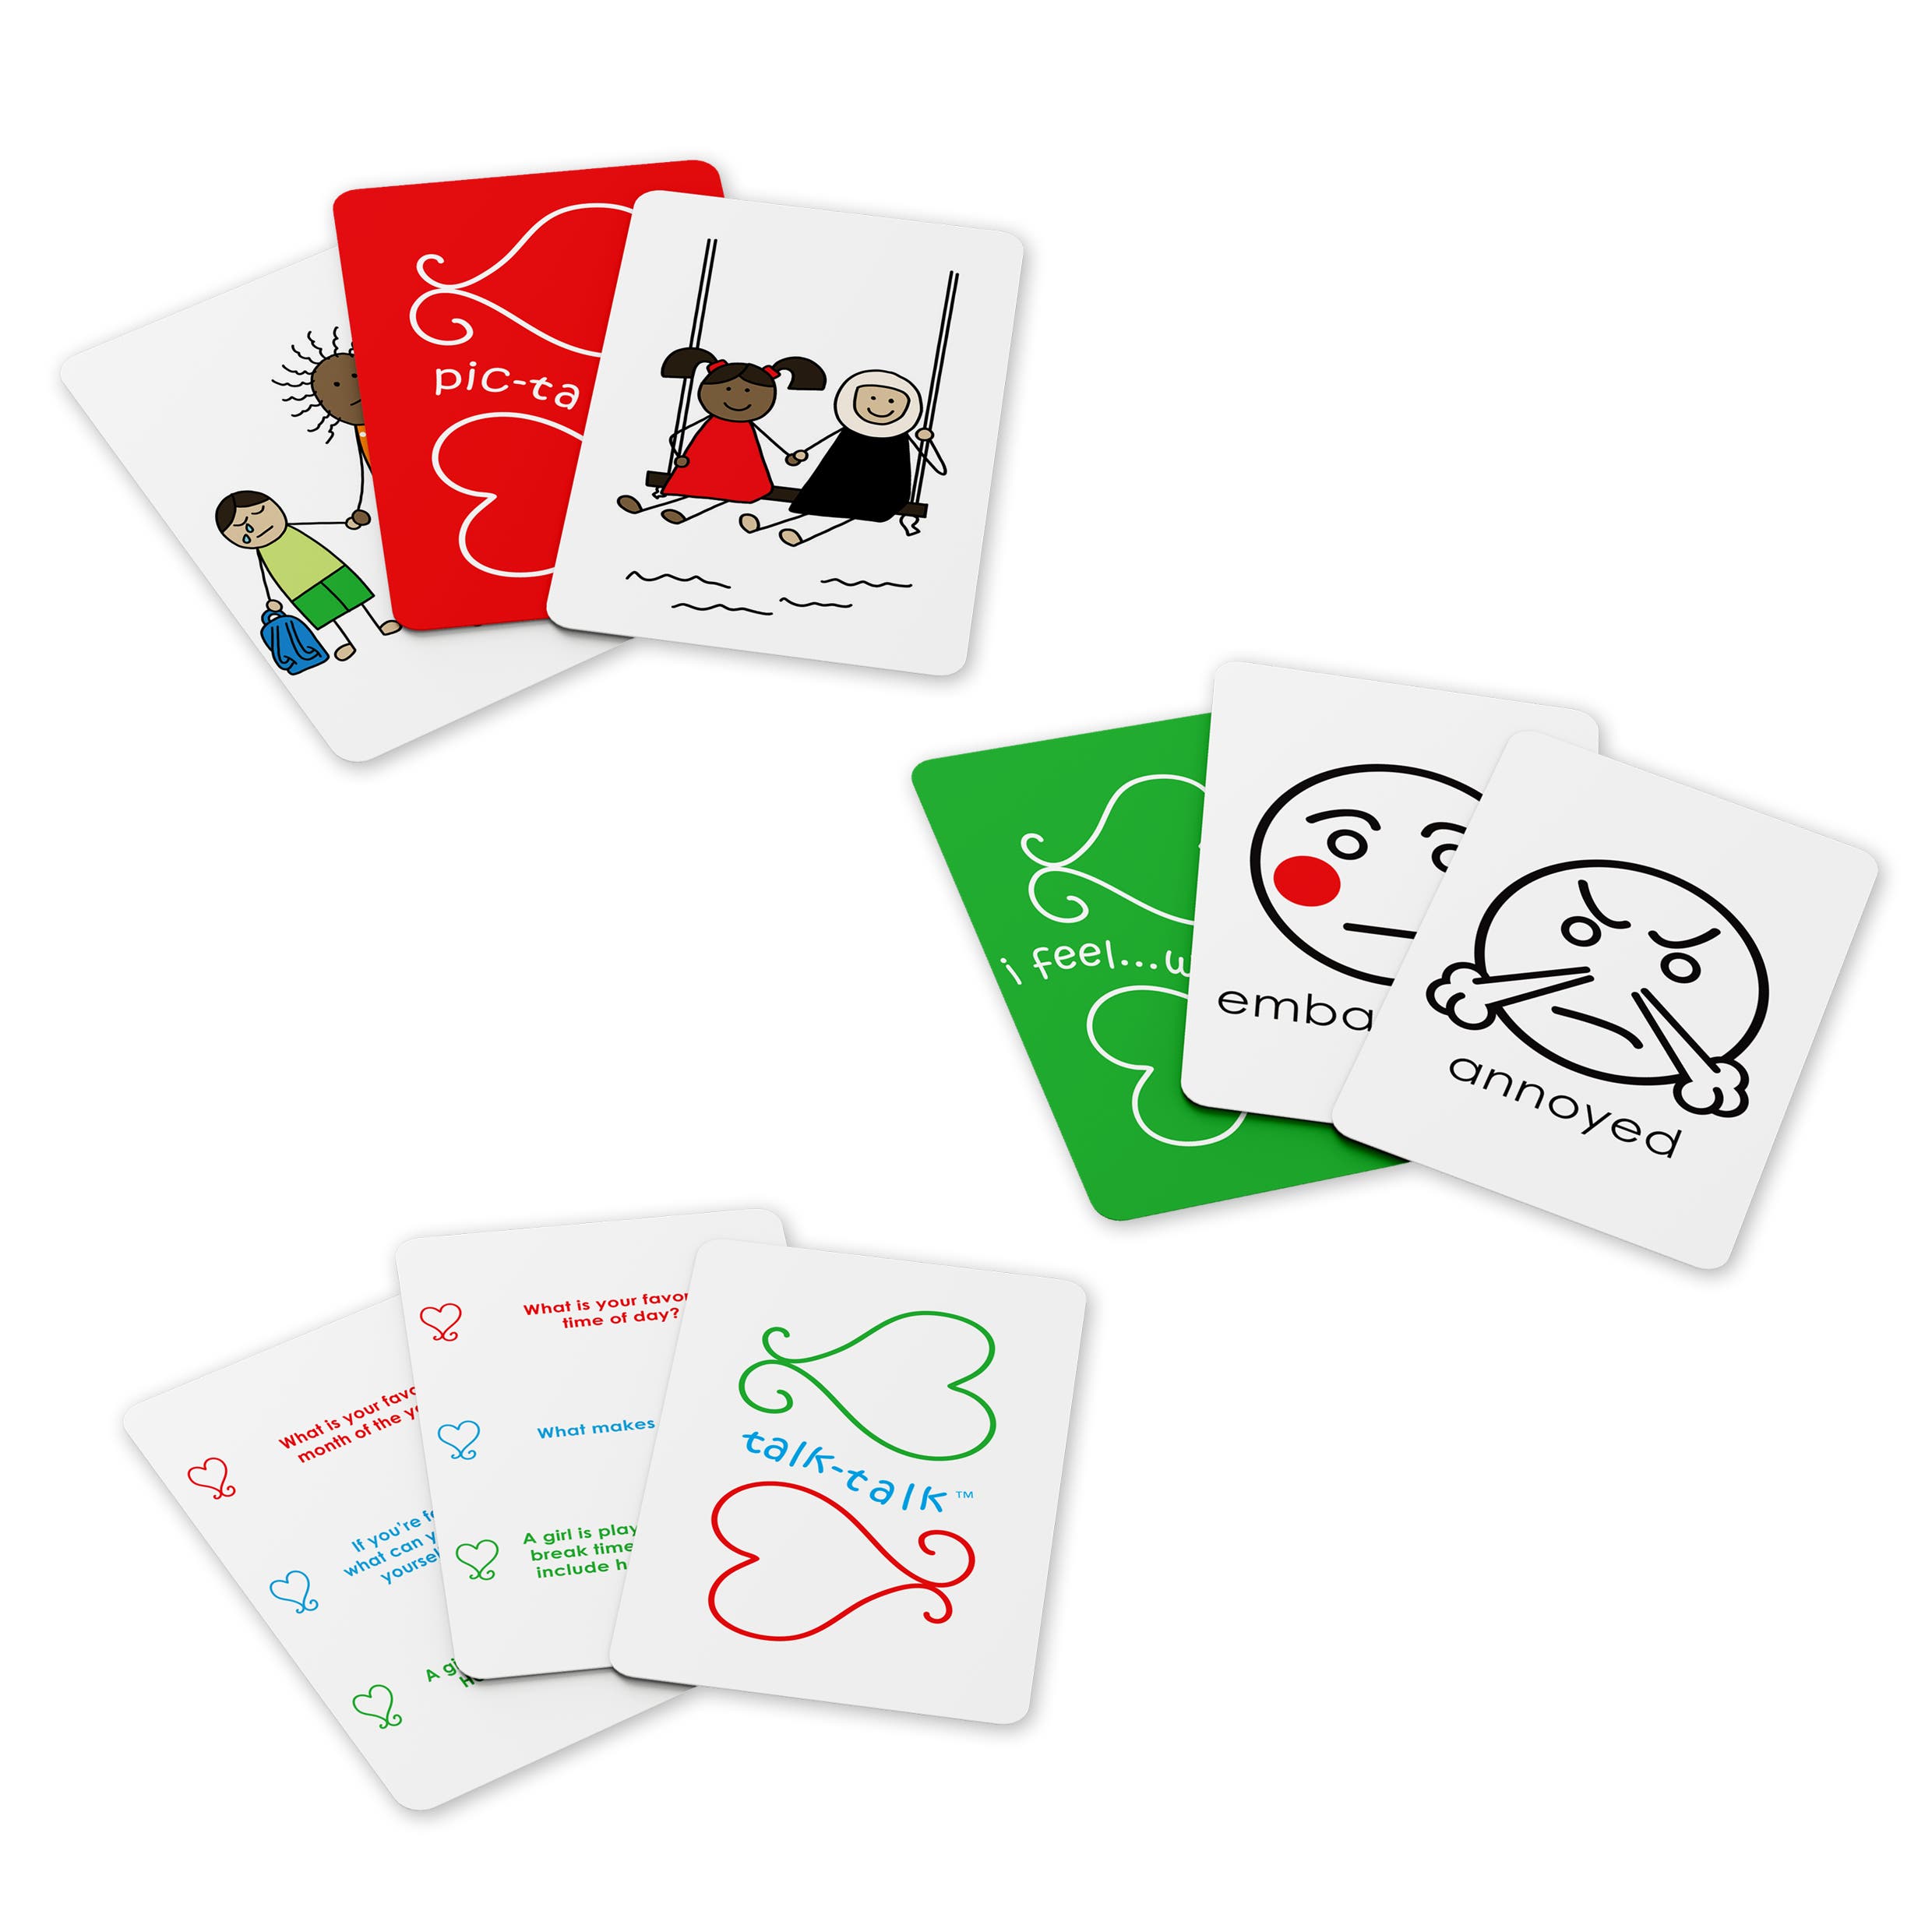 'Pic-Tale', 'Talk Talk' 'I feel... when' cards from the Smart Heart board game, developed by two Dubai-based psychologists to build children's emotional intelligence and address mental health issues. (Supplied)